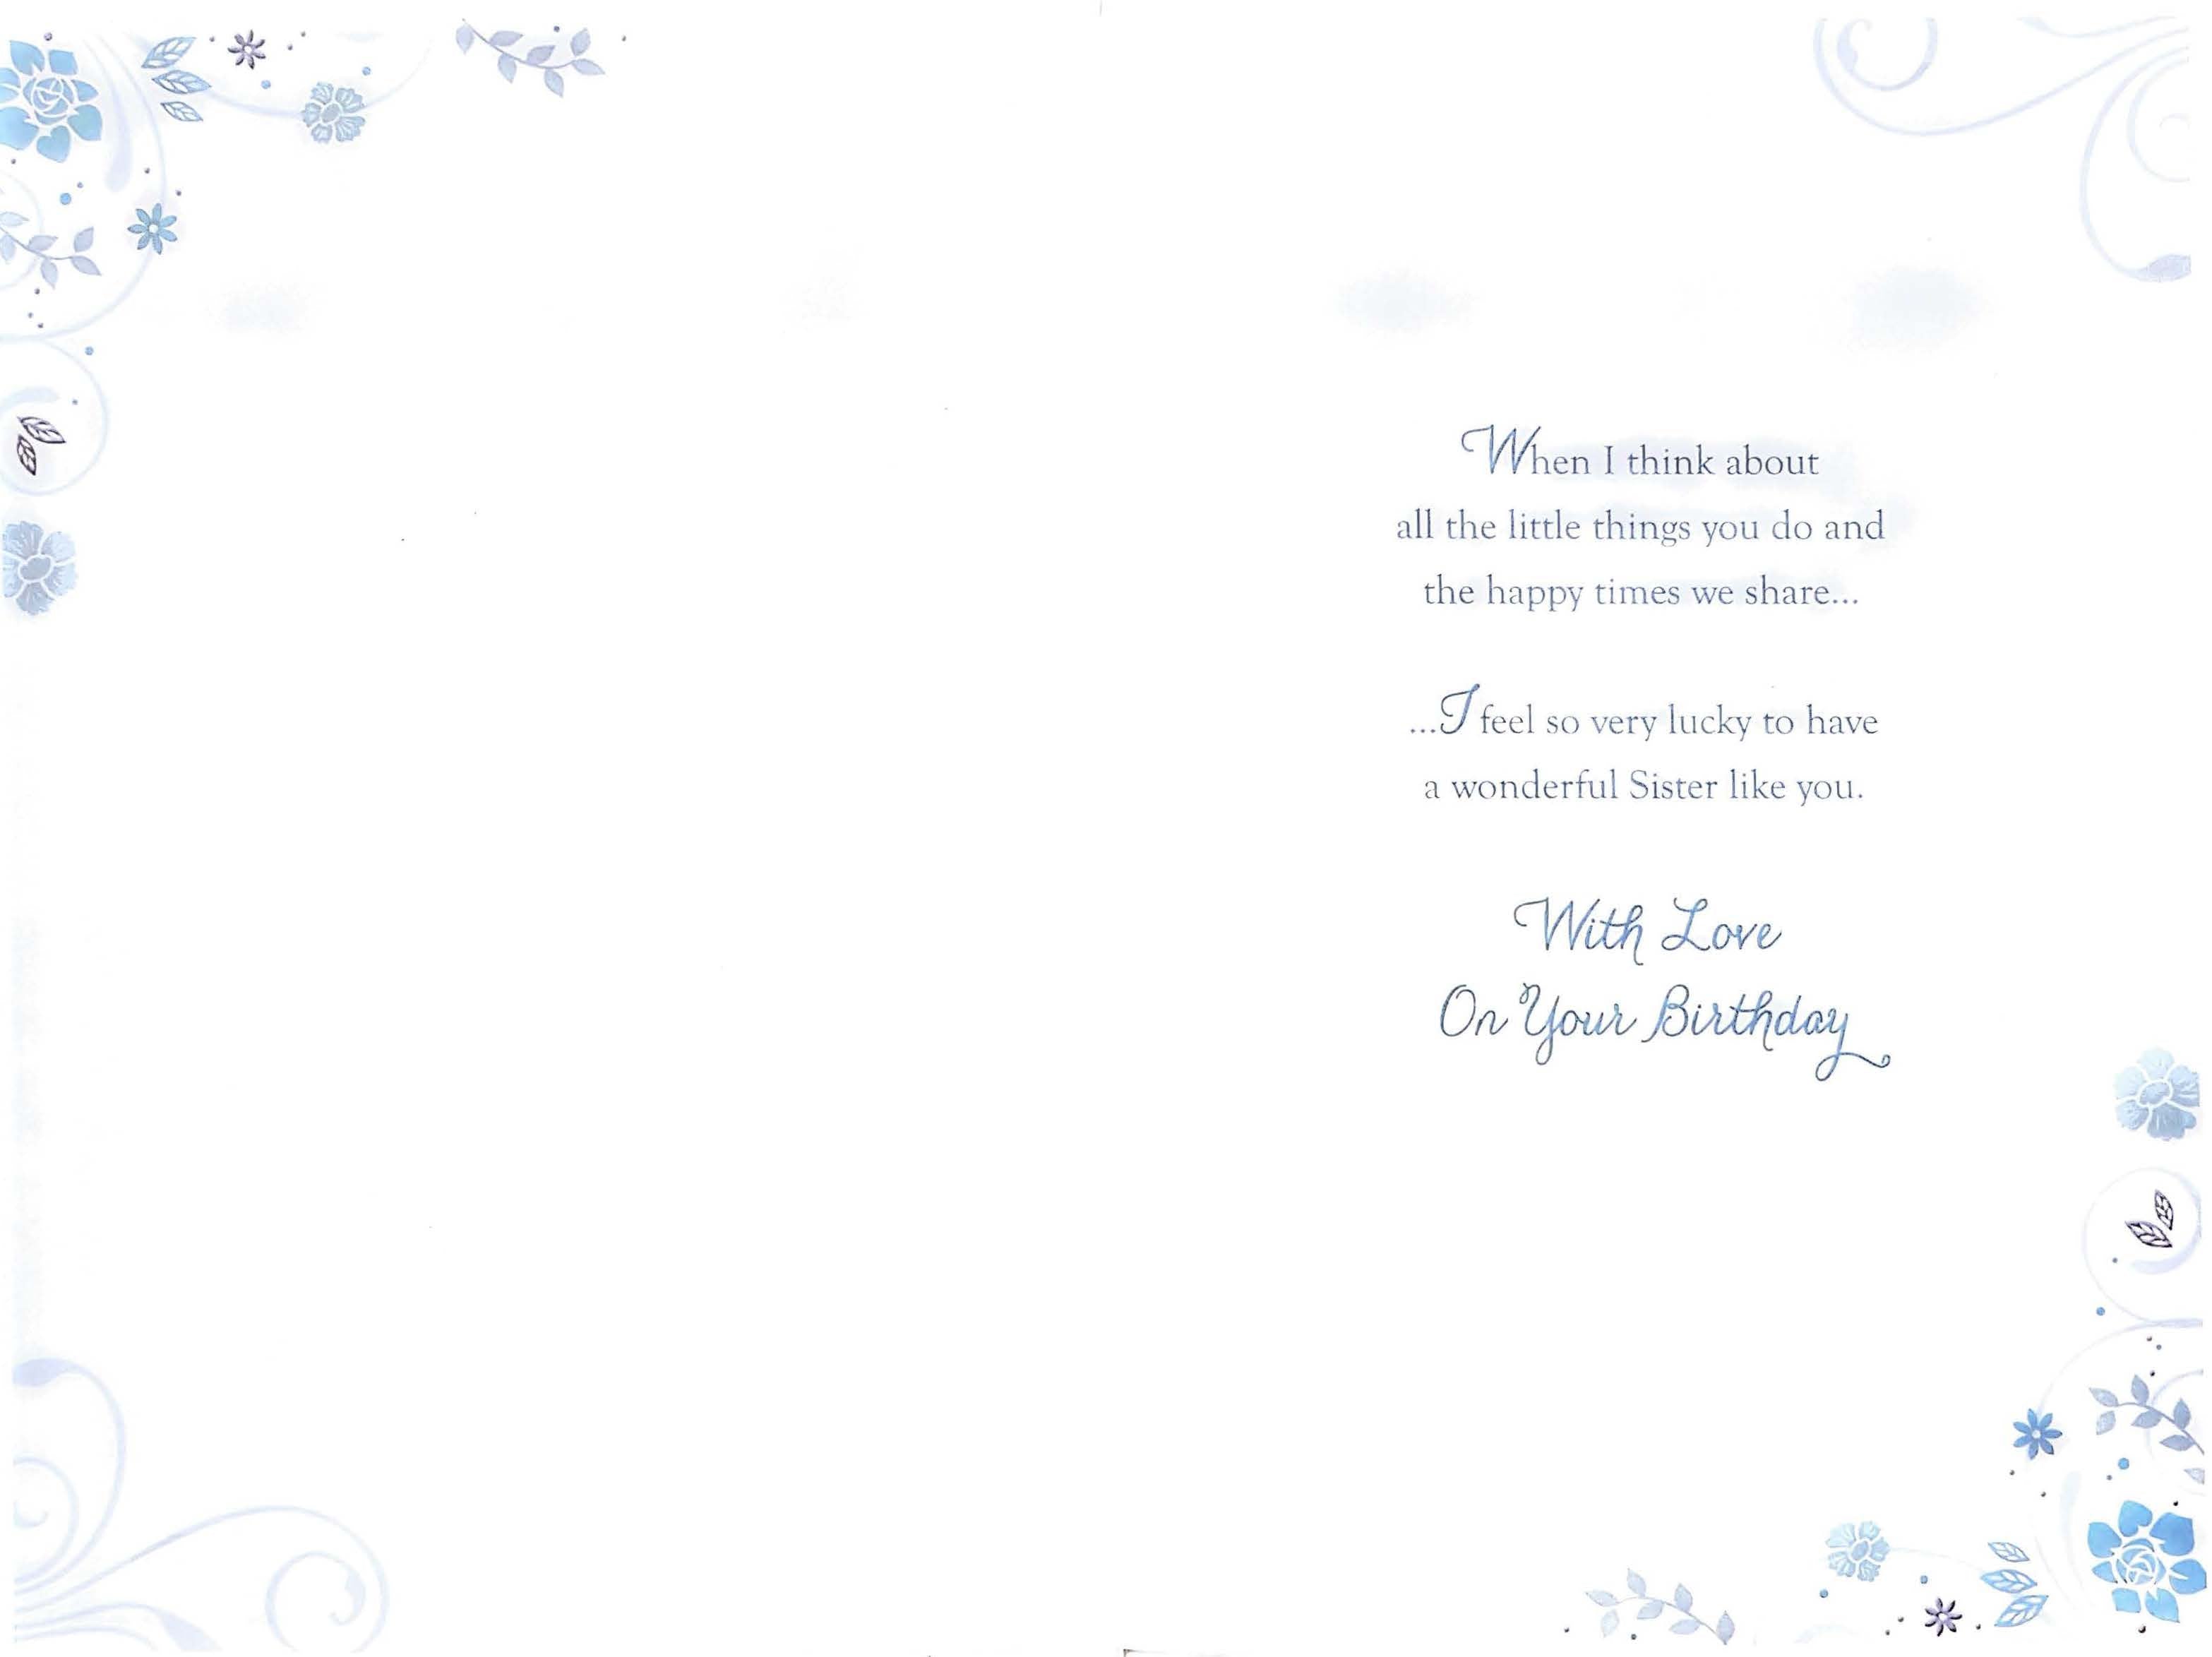 Sister Birthday Card - The Blue Princess Gown